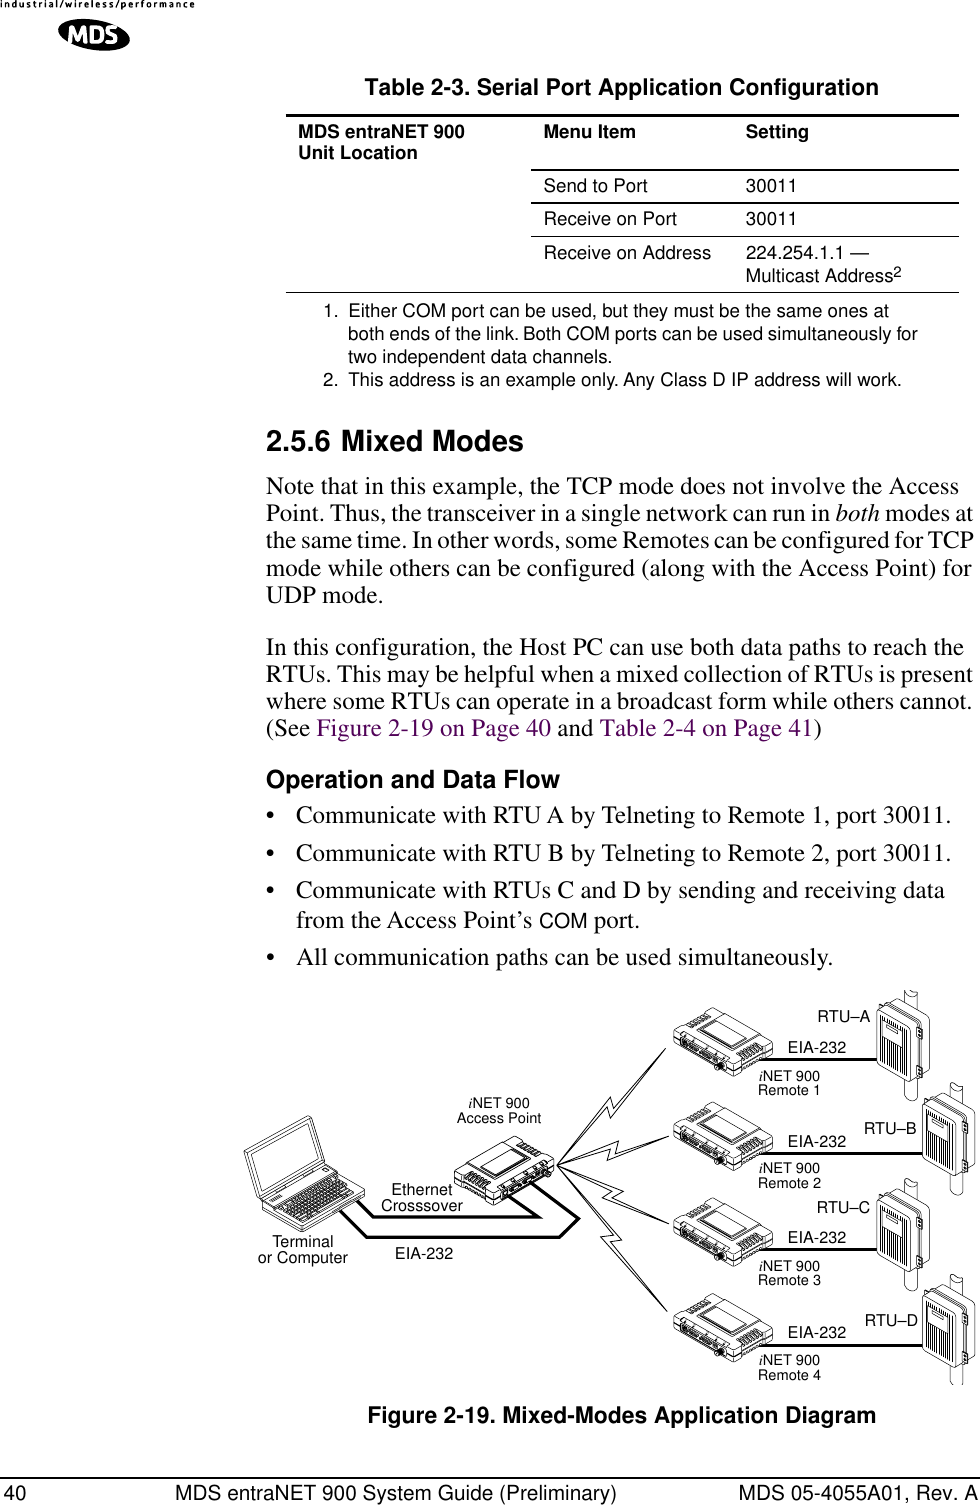 40 MDS entraNET 900 System Guide (Preliminary) MDS 05-4055A01, Rev. A2.5.6 Mixed ModesNote that in this example, the TCP mode does not involve the Access Point. Thus, the transceiver in a single network can run in both modes at the same time. In other words, some Remotes can be configured for TCP mode while others can be configured (along with the Access Point) for UDP mode. In this configuration, the Host PC can use both data paths to reach the RTUs. This may be helpful when a mixed collection of RTUs is present where some RTUs can operate in a broadcast form while others cannot. (See Figure 2-19 on Page 40 and Table 2-4 on Page 41)Operation and Data Flow• Communicate with RTU A by Telneting to Remote 1, port 30011.• Communicate with RTU B by Telneting to Remote 2, port 30011.• Communicate with RTUs C and D by sending and receiving data from the Access Point’s COM port.• All communication paths can be used simultaneously.Invisible place holderFigure 2-19. Mixed-Modes Application DiagramSend to Port 30011 Receive on Port 30011 Receive on Address 224.254.1.1 —Multicast Address2 1. Either COM port can be used, but they must be the same ones at both ends of the link. Both COM ports can be used simultaneously for two independent data channels.2. This address is an example only. Any Class D IP address will work.Table 2-3. Serial Port Application ConfigurationMDS entraNET 900Unit Location Menu Item SettingEIA-232Terminalor ComputerRTU–CEIA-232EIA-232EIA-232RTU–DEIA-232LANCOM1COM2PWRLINKiNET 900Remote 4EthernetCrosssoverRTU–BRTU–AiNET 900Access PointLANCOM1COM2PWRLINKiNET 900Remote 1LANCOM1COM2PWRLINKiNET 900Remote 2LANCOM1COM2PWRLINKiNET 900Remote 3